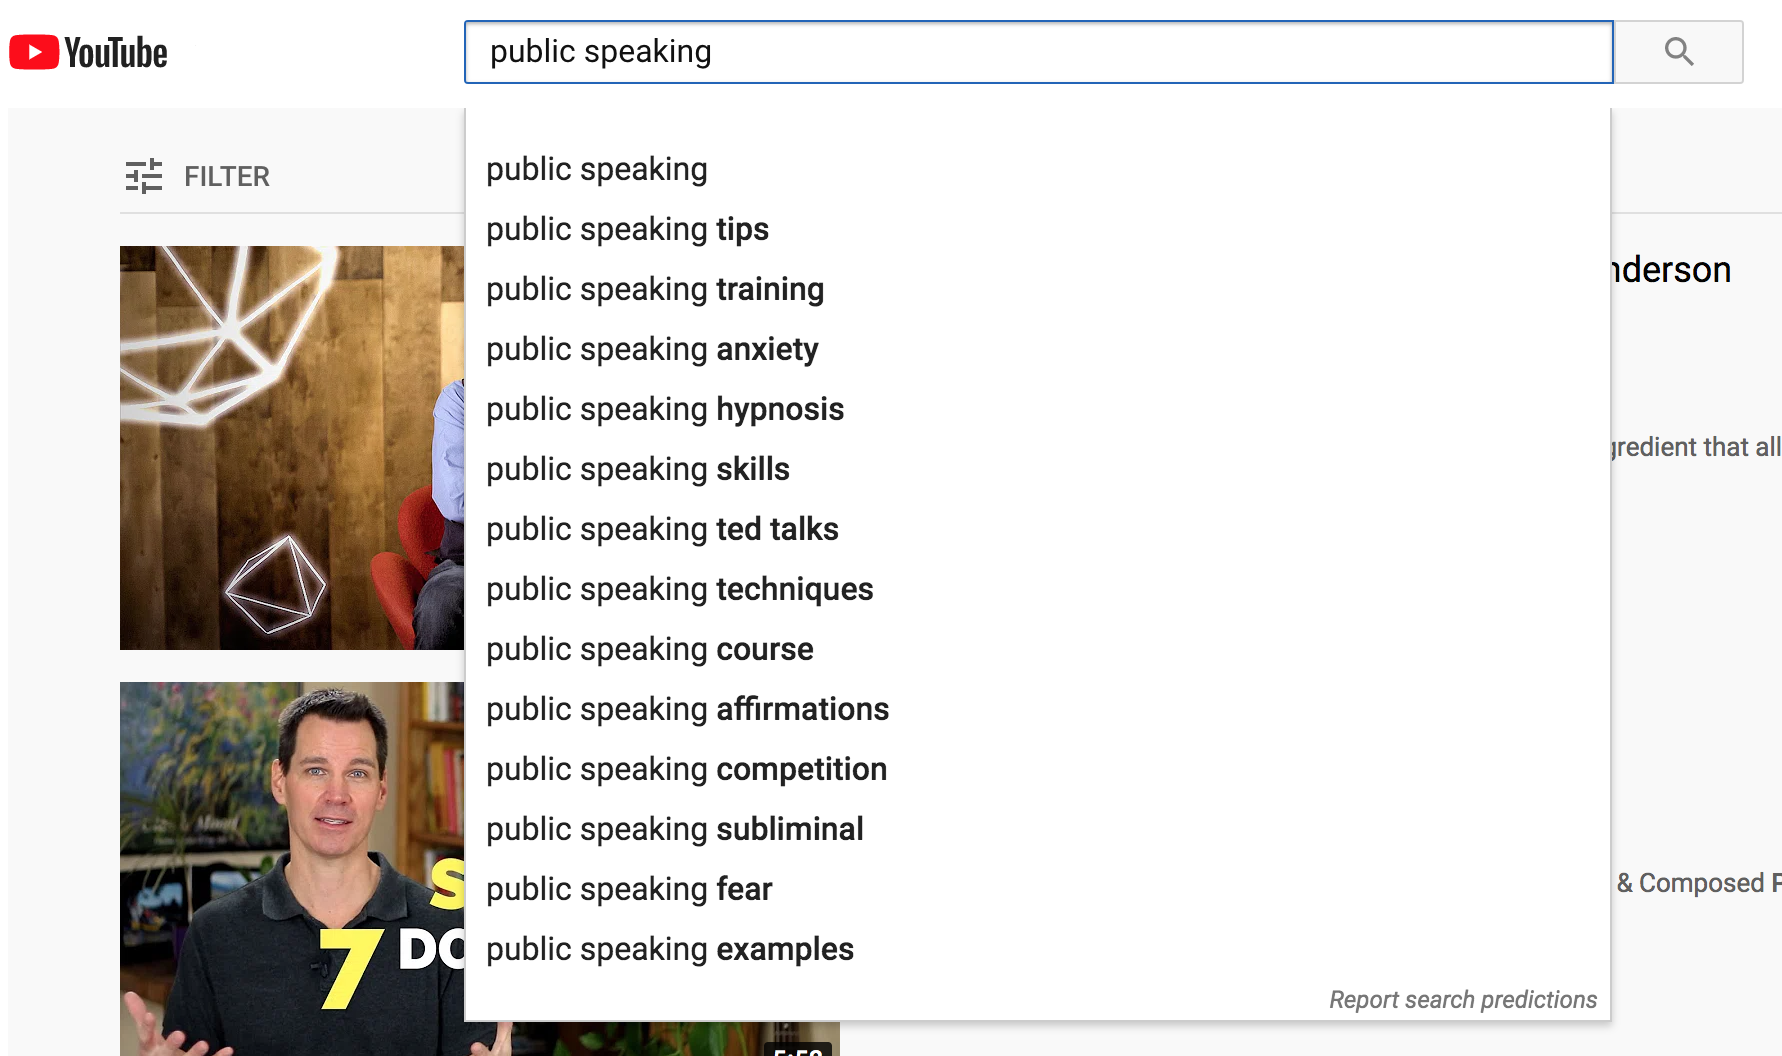 As you can see, YouTube will promptly provide you with a list of keyword ideas closely related to your input.